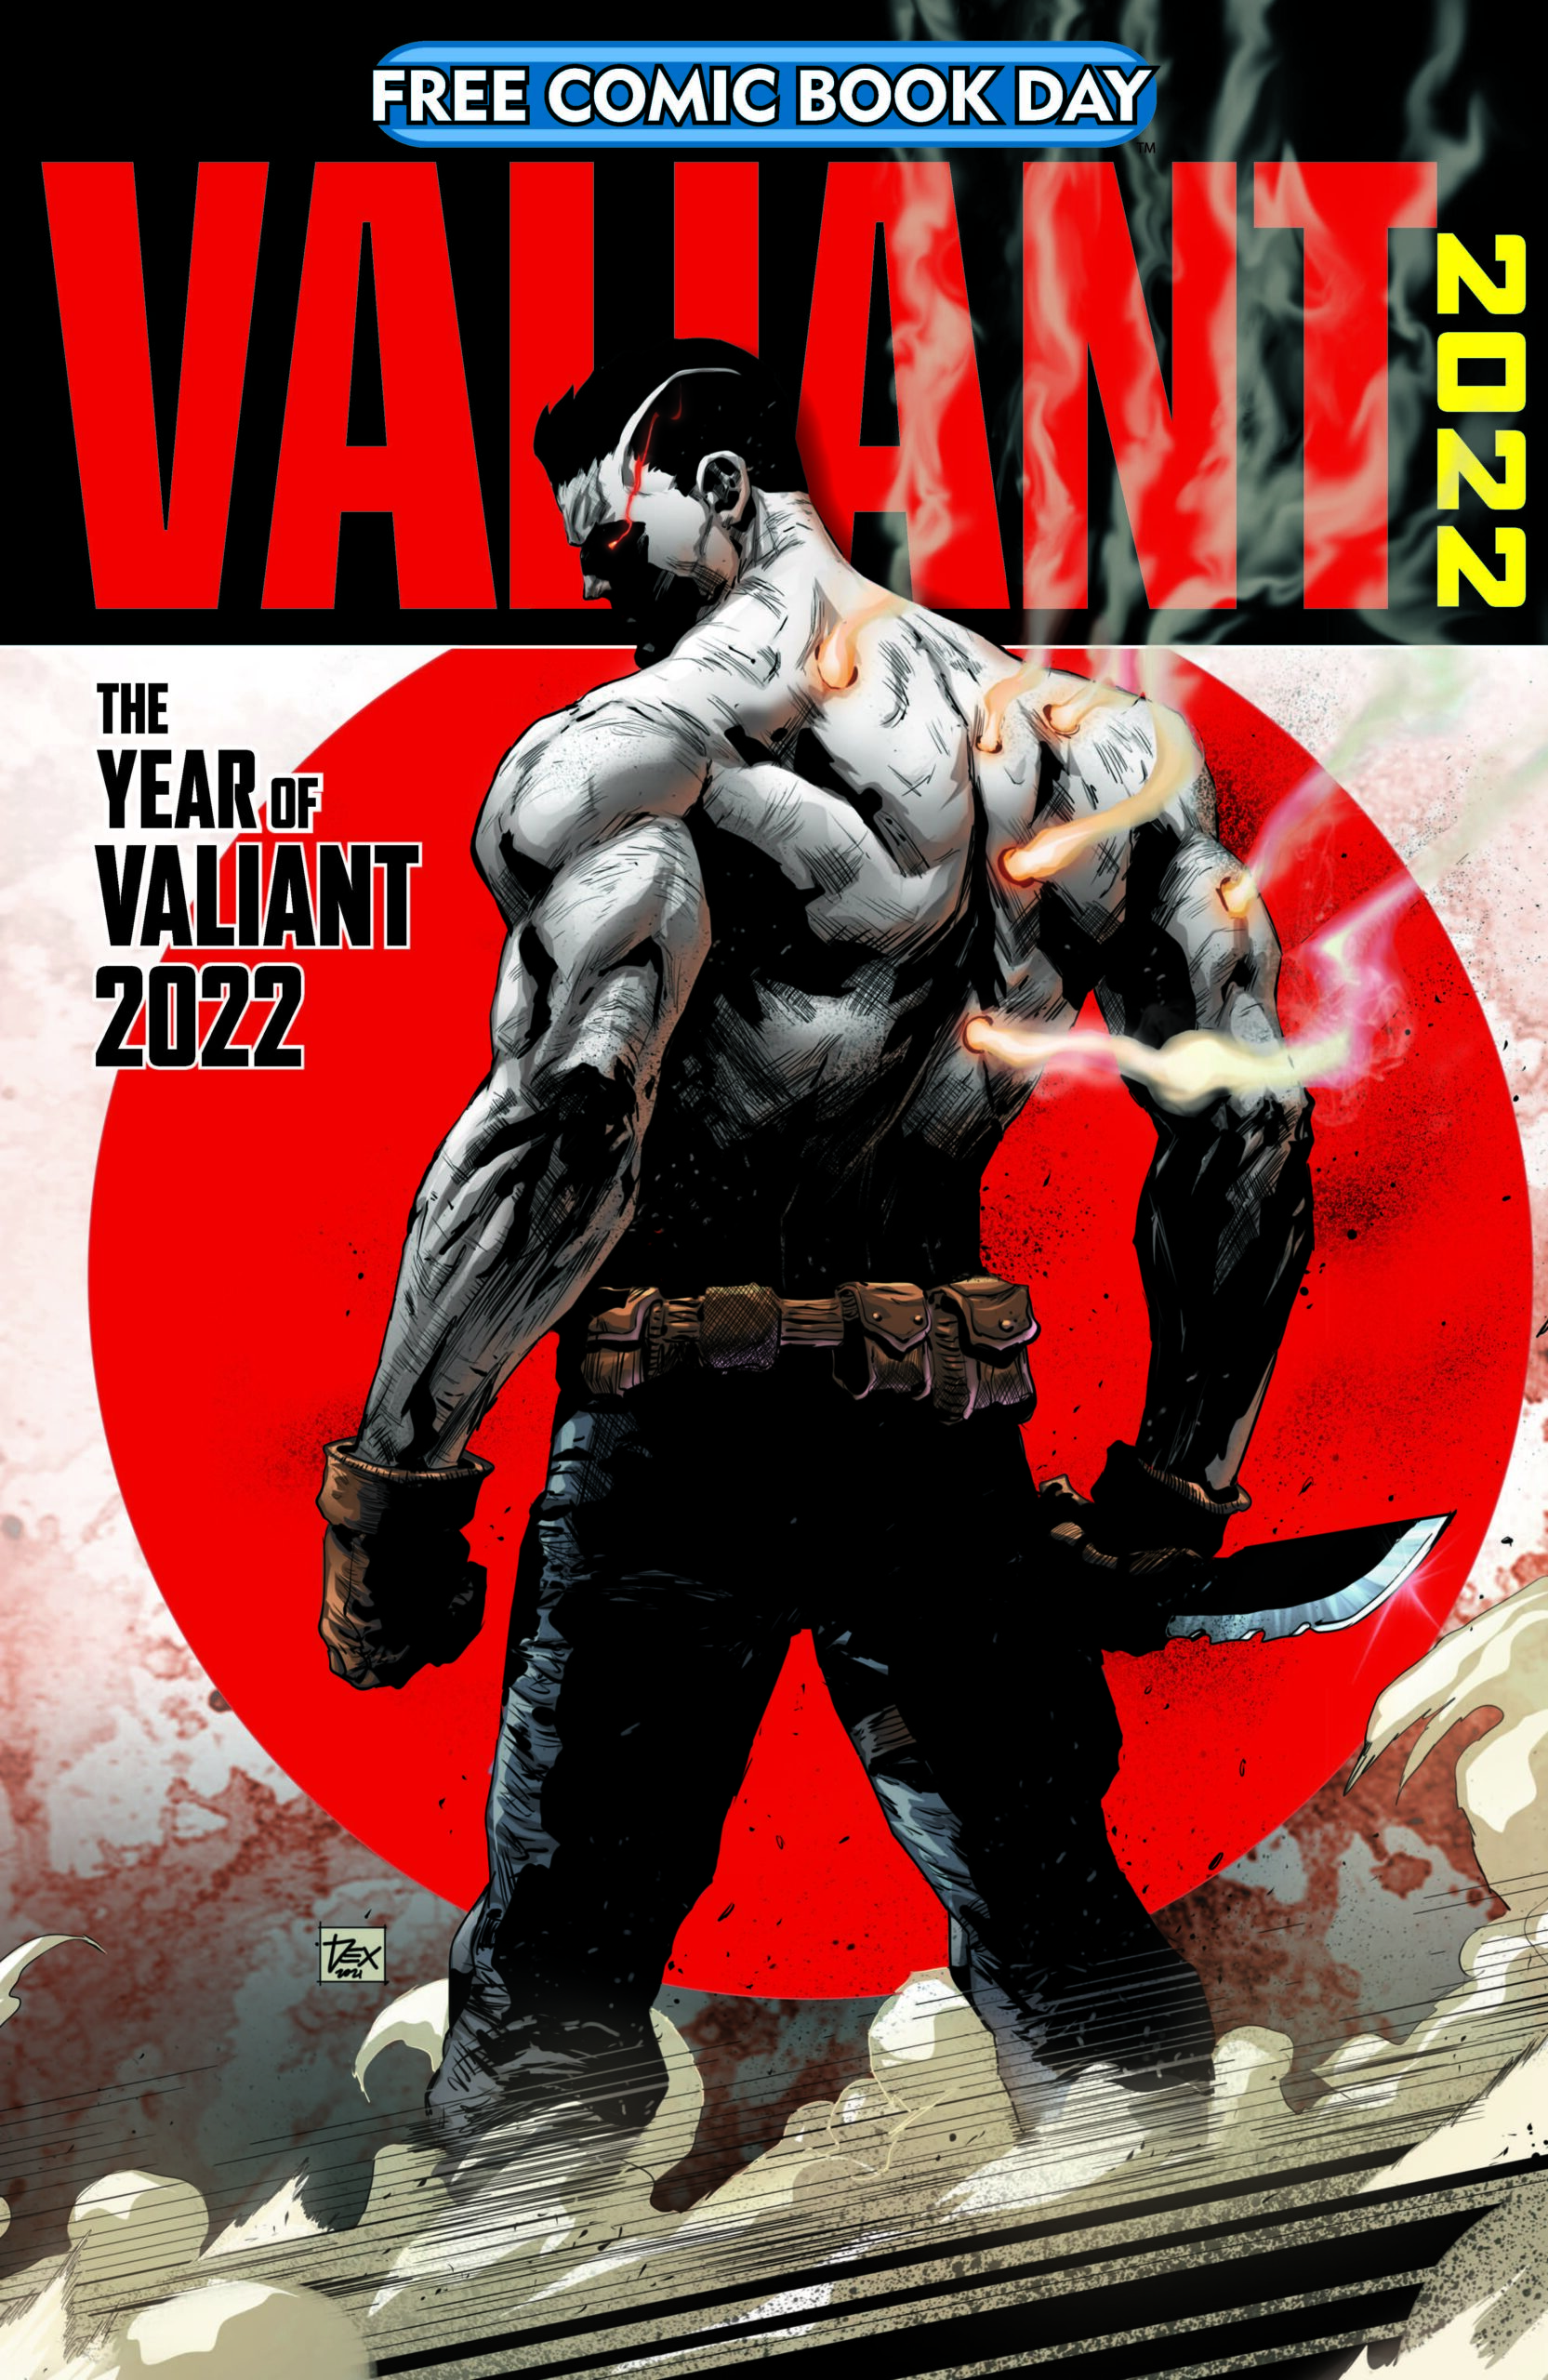 THE VALIANT 4001 AD A.D 1 FCBD FREE COMIC BOOK DAY 2016 GIVEAWAY PROMO NM 